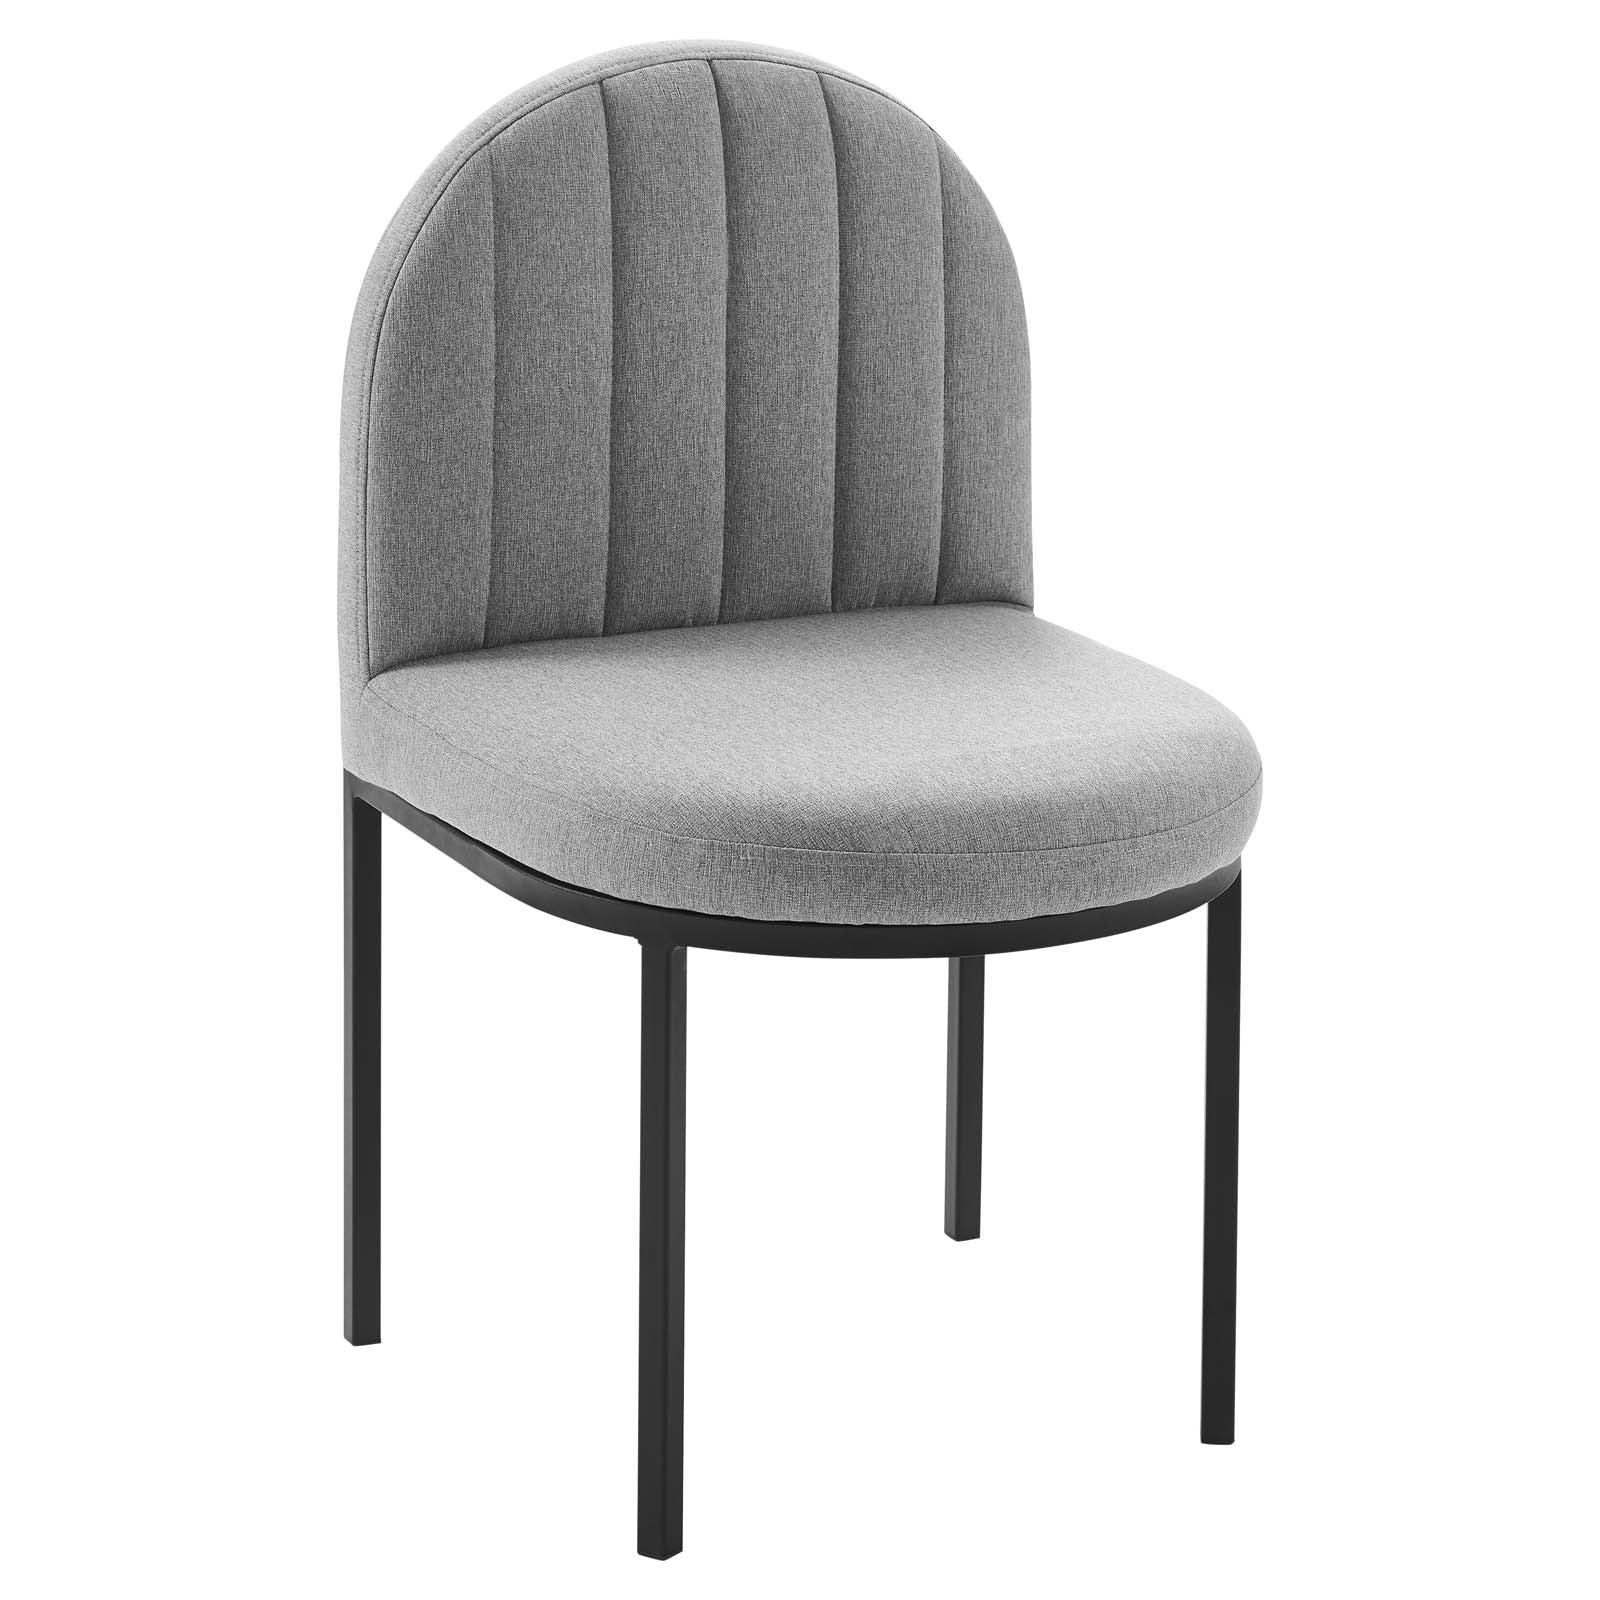 Modway Dining Chairs - Isla Channel Tufted Upholstered Fabric Dining Side Chair Black Light Gray